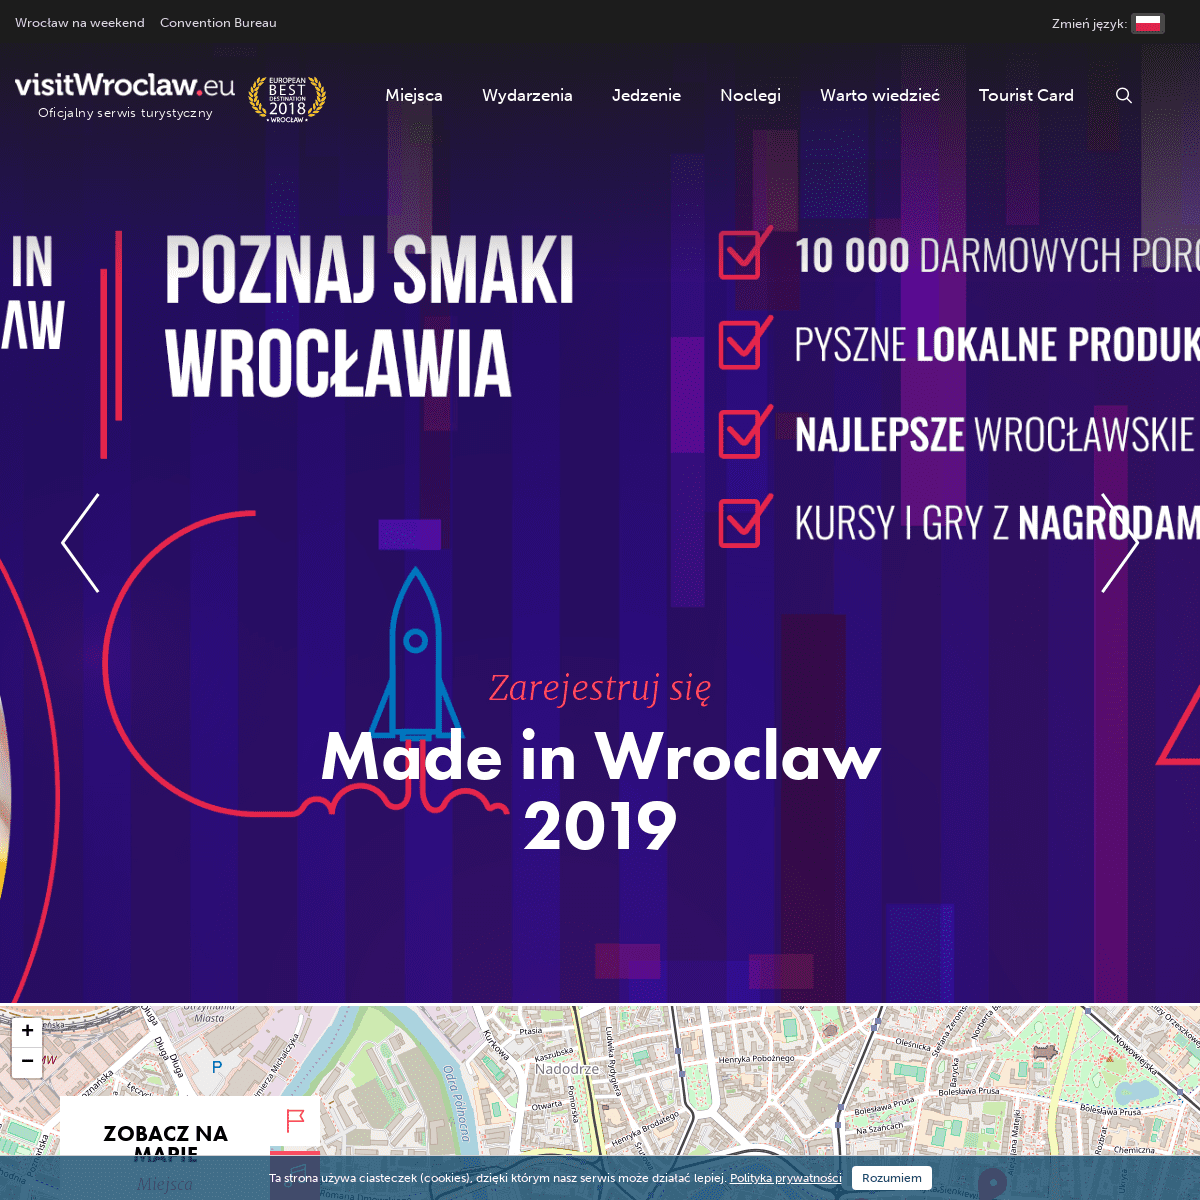 A complete backup of visitwroclaw.eu